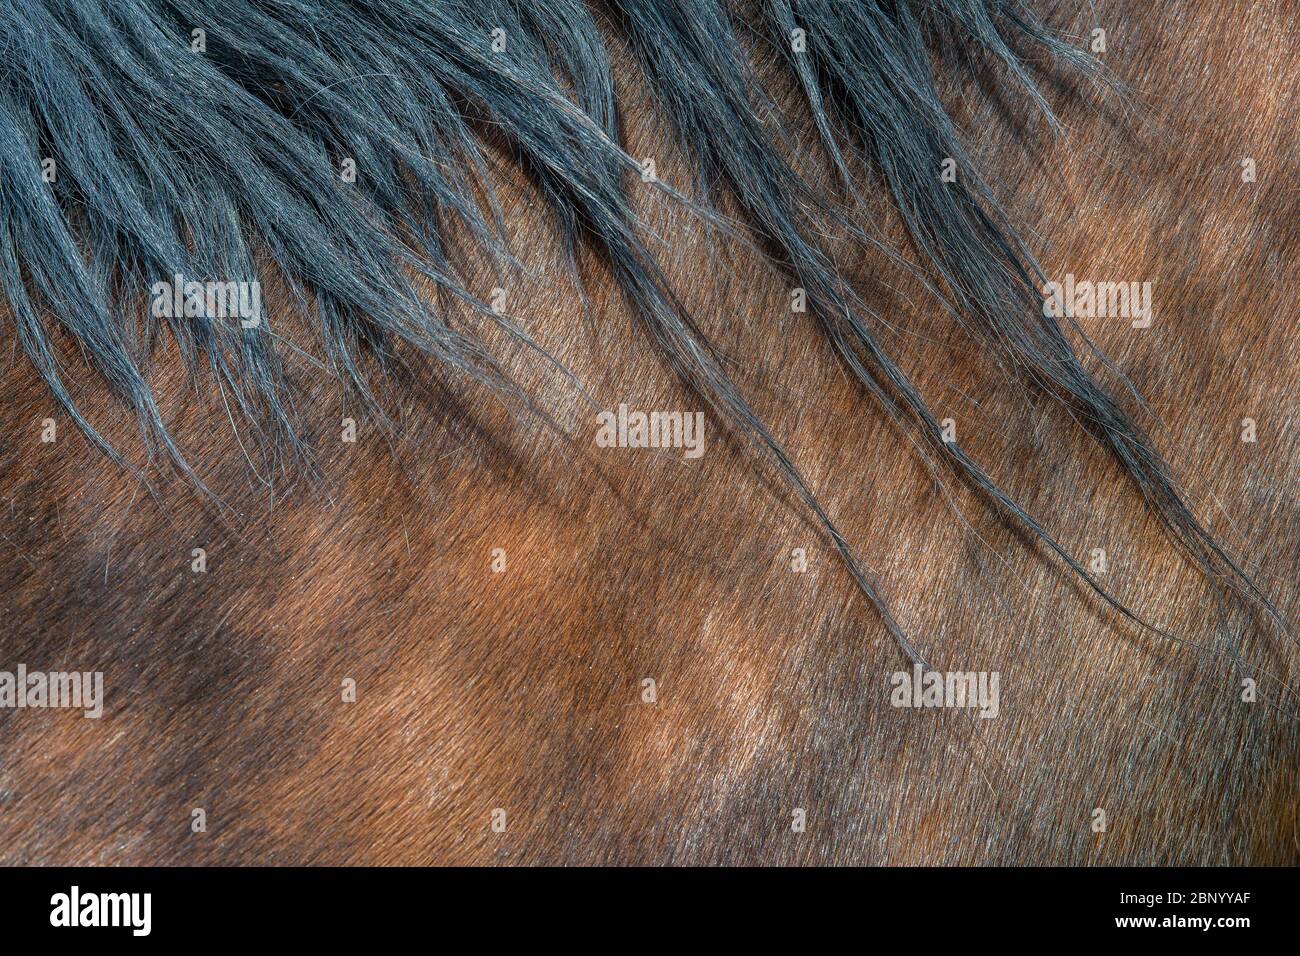 Close-up of textured pelt from a young brown horse Stock Photo